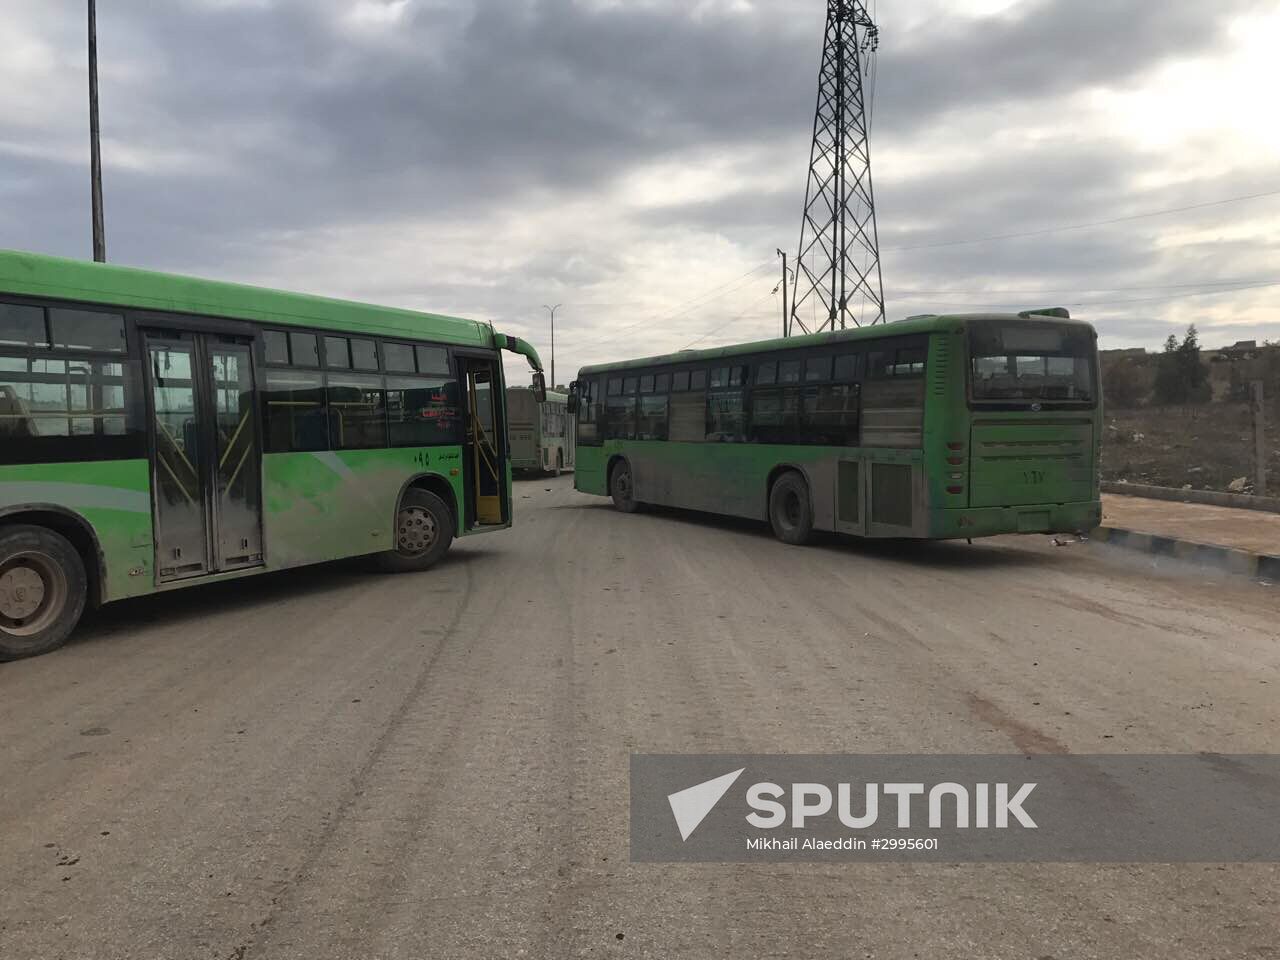 Militants and their families leave eastern Aleppo